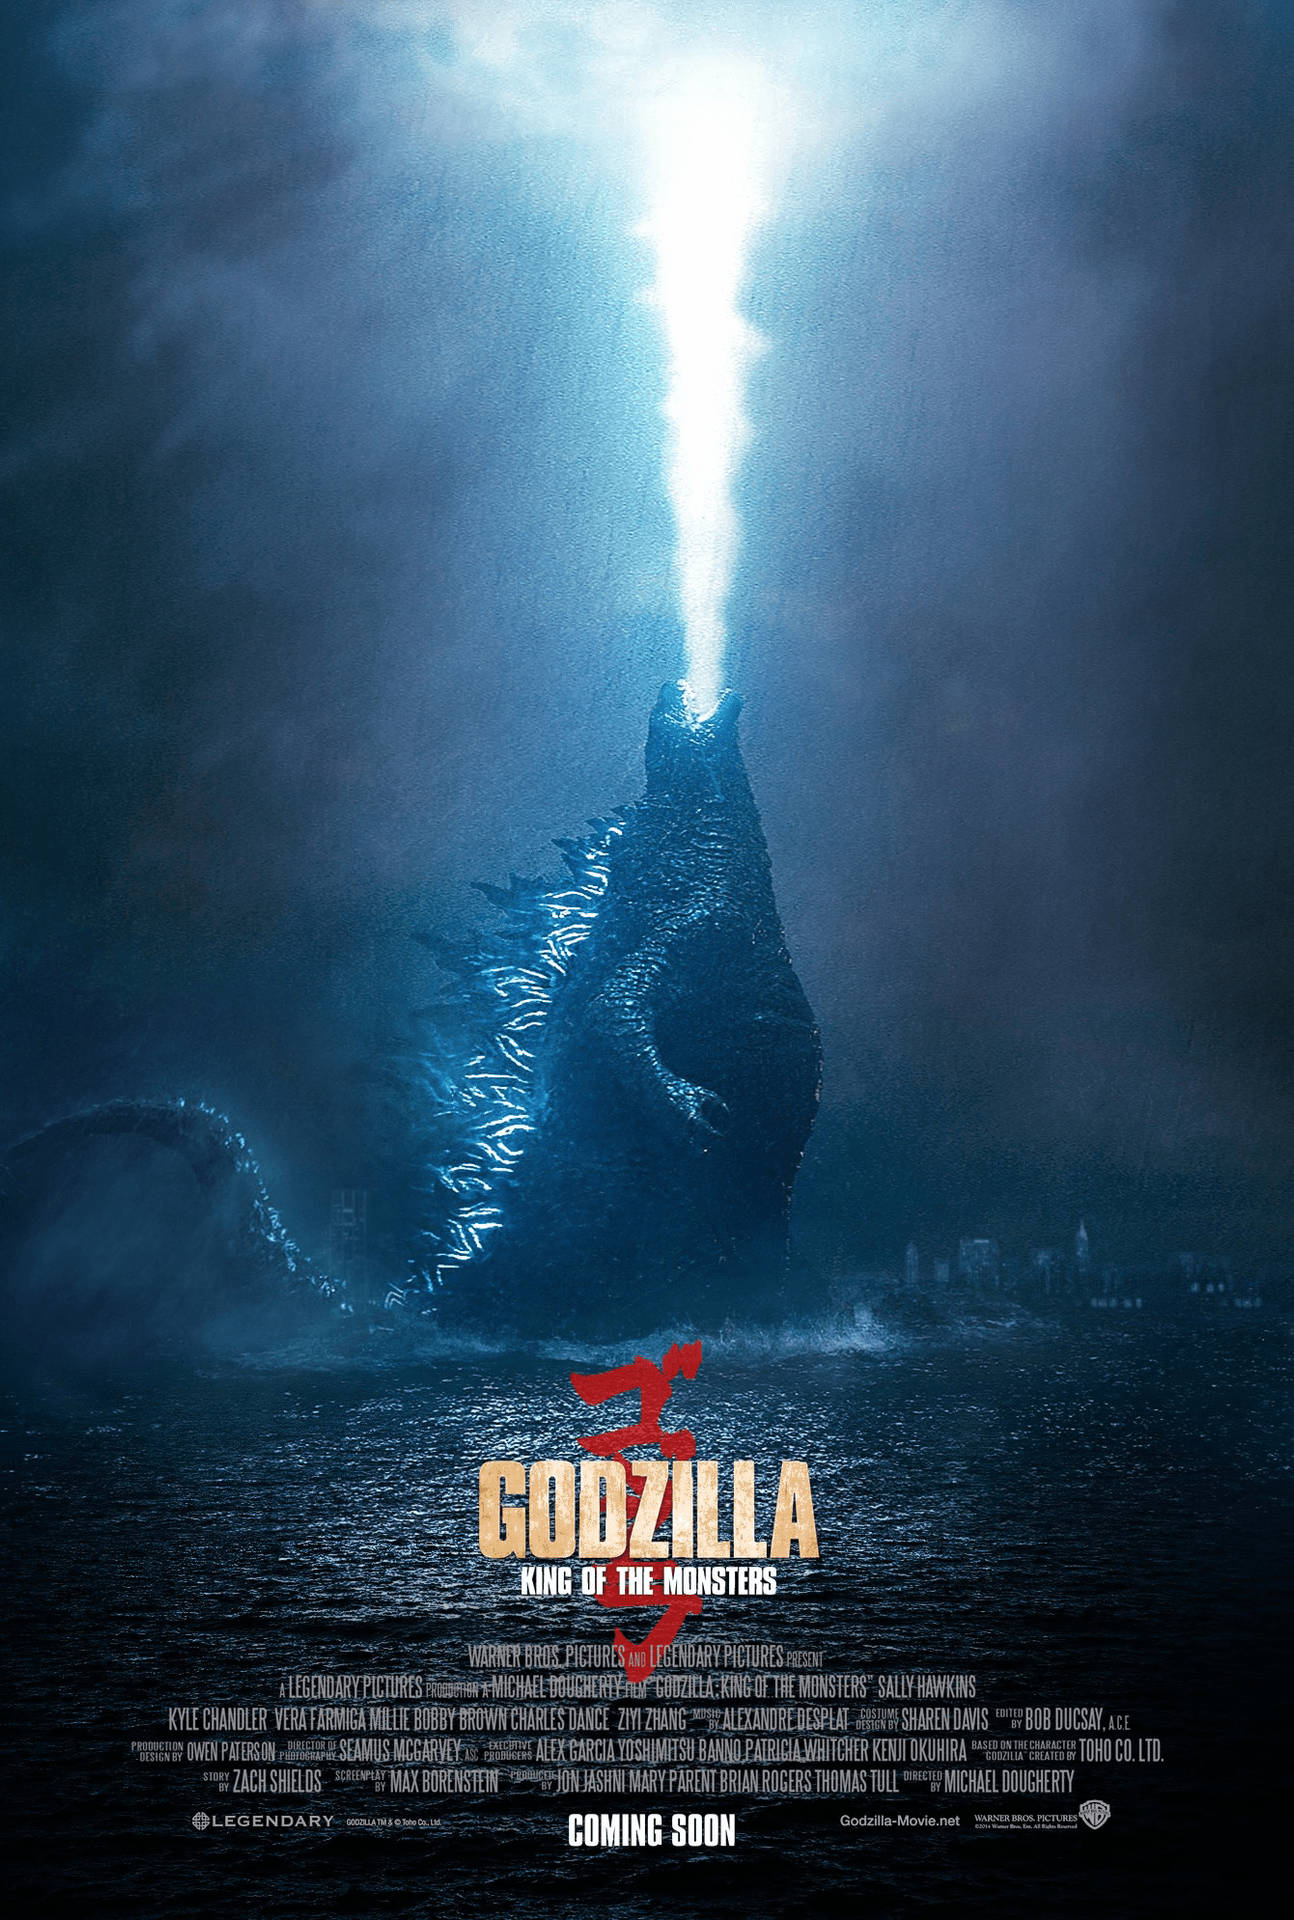 "Prepare To Witness The Epic Battle Of Godzilla: King Of The Monsters." Wallpaper